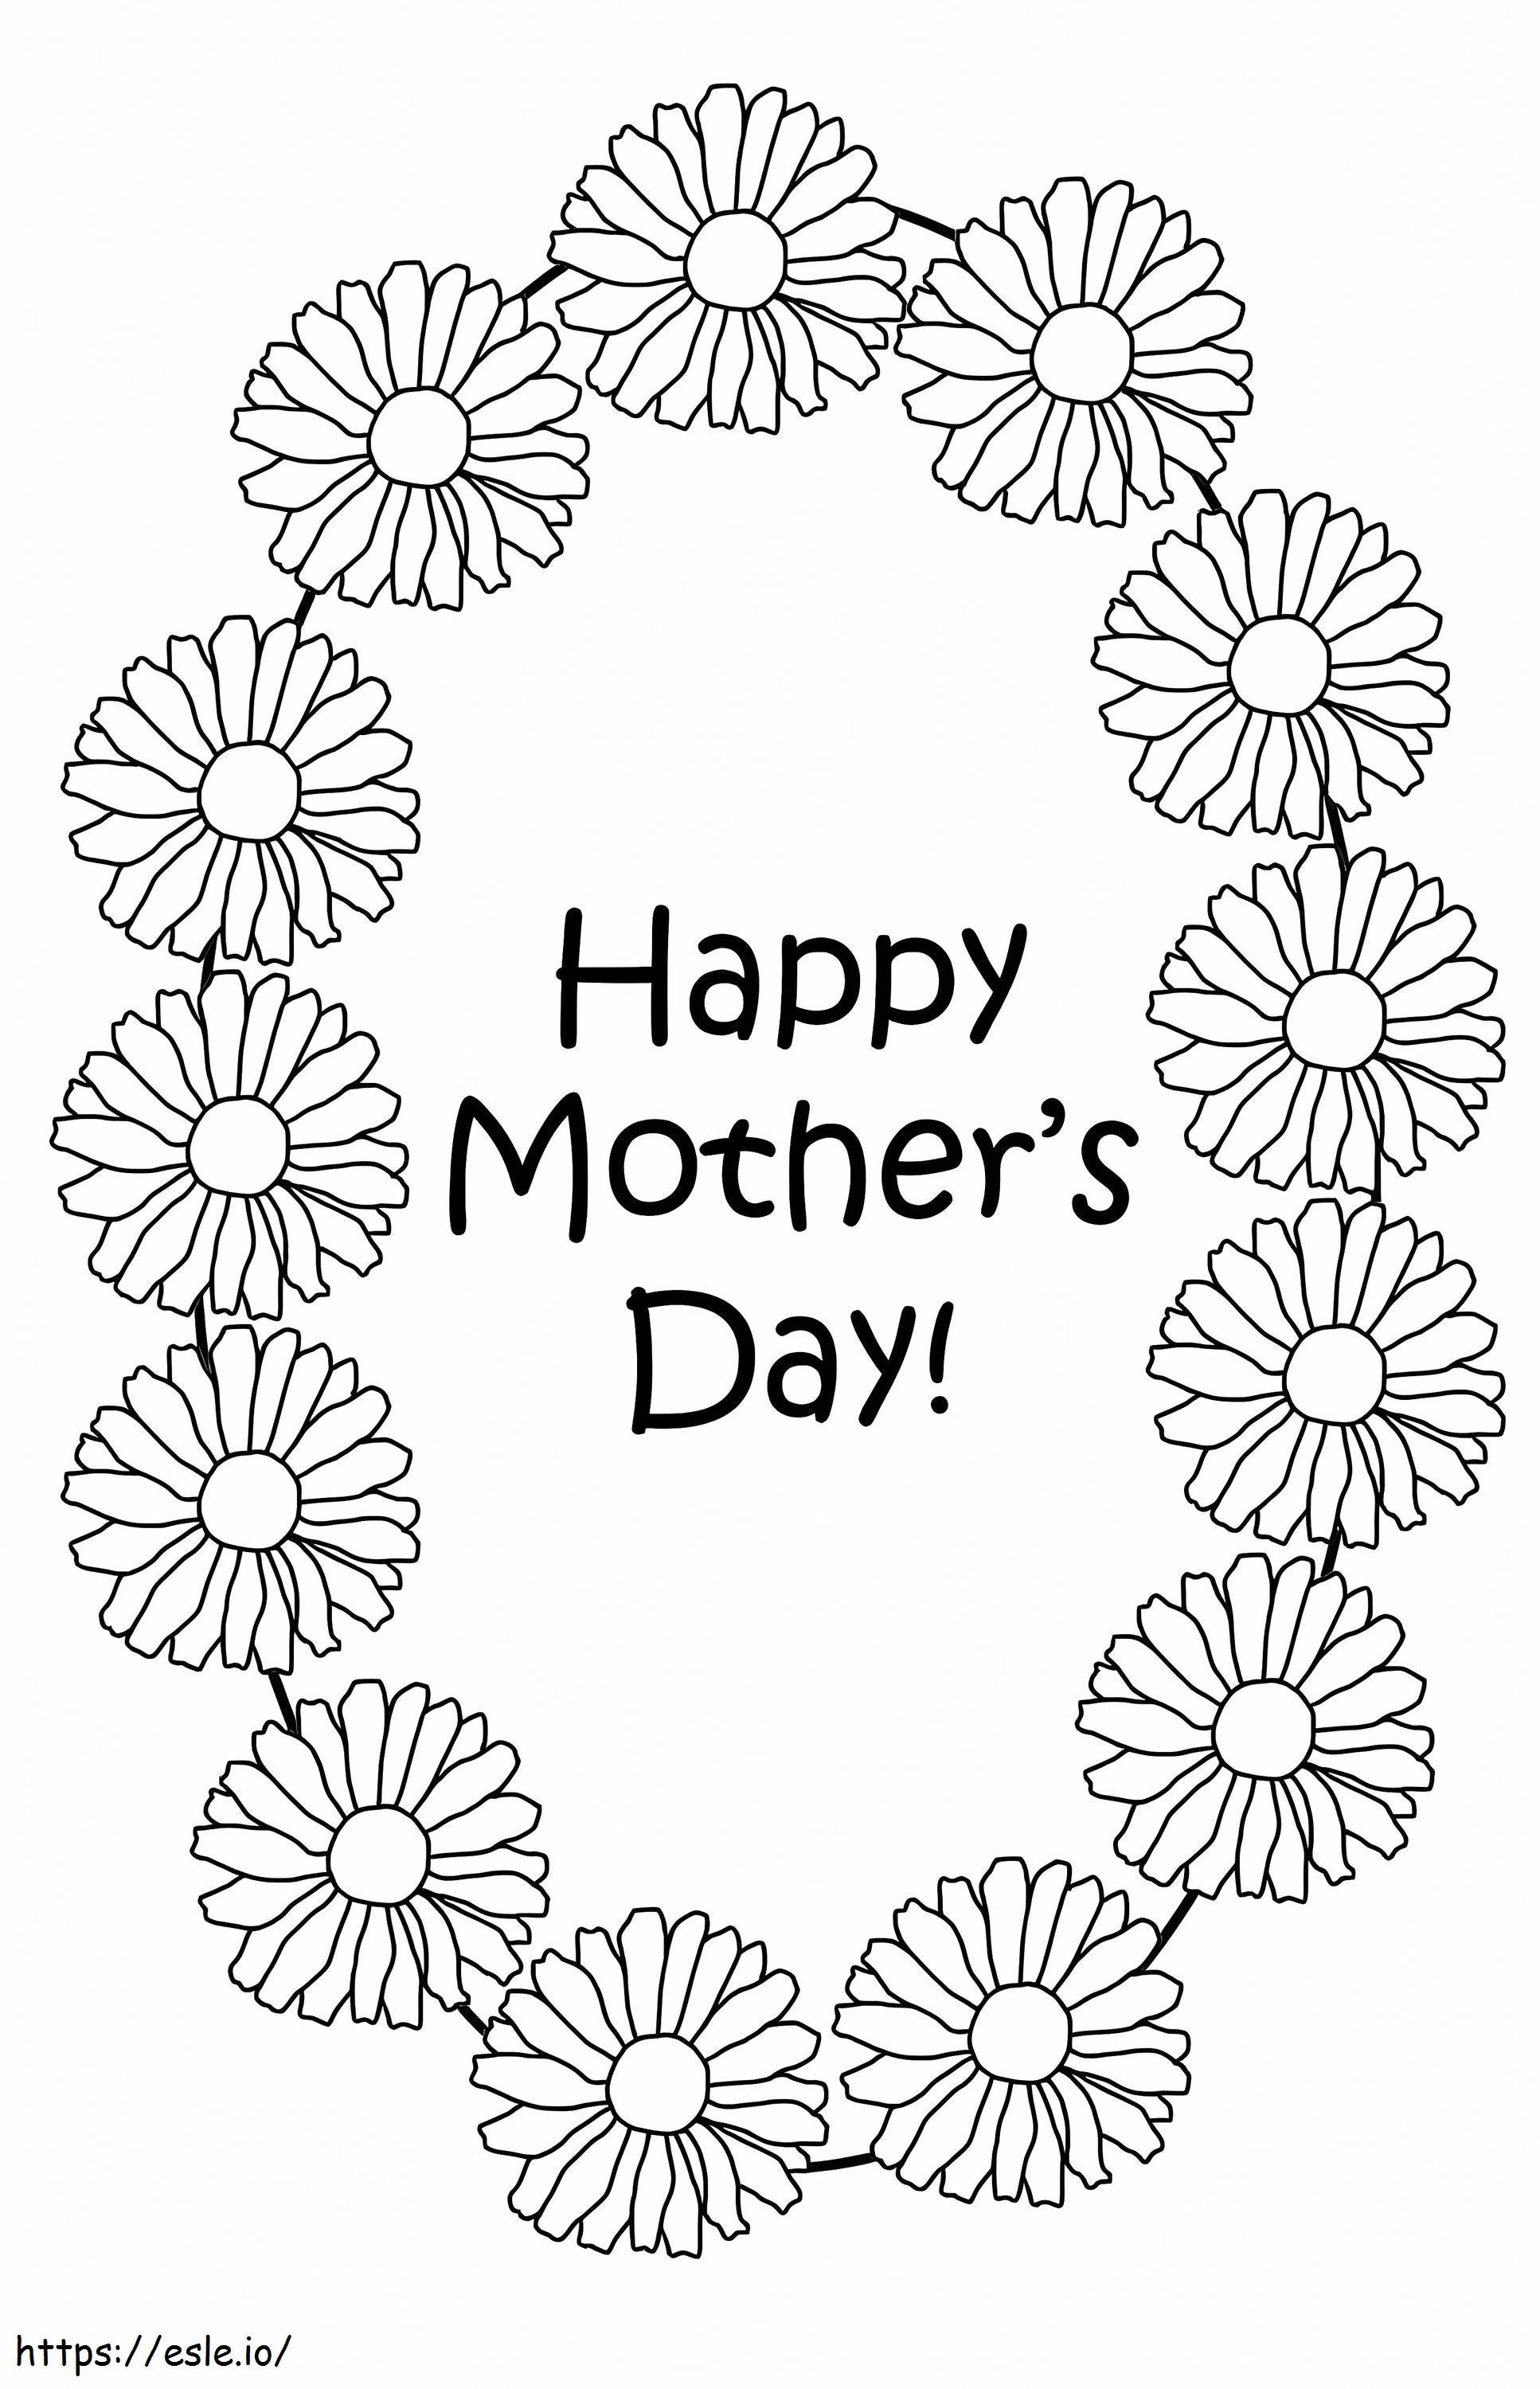 Happy Mothers Day 4 coloring page